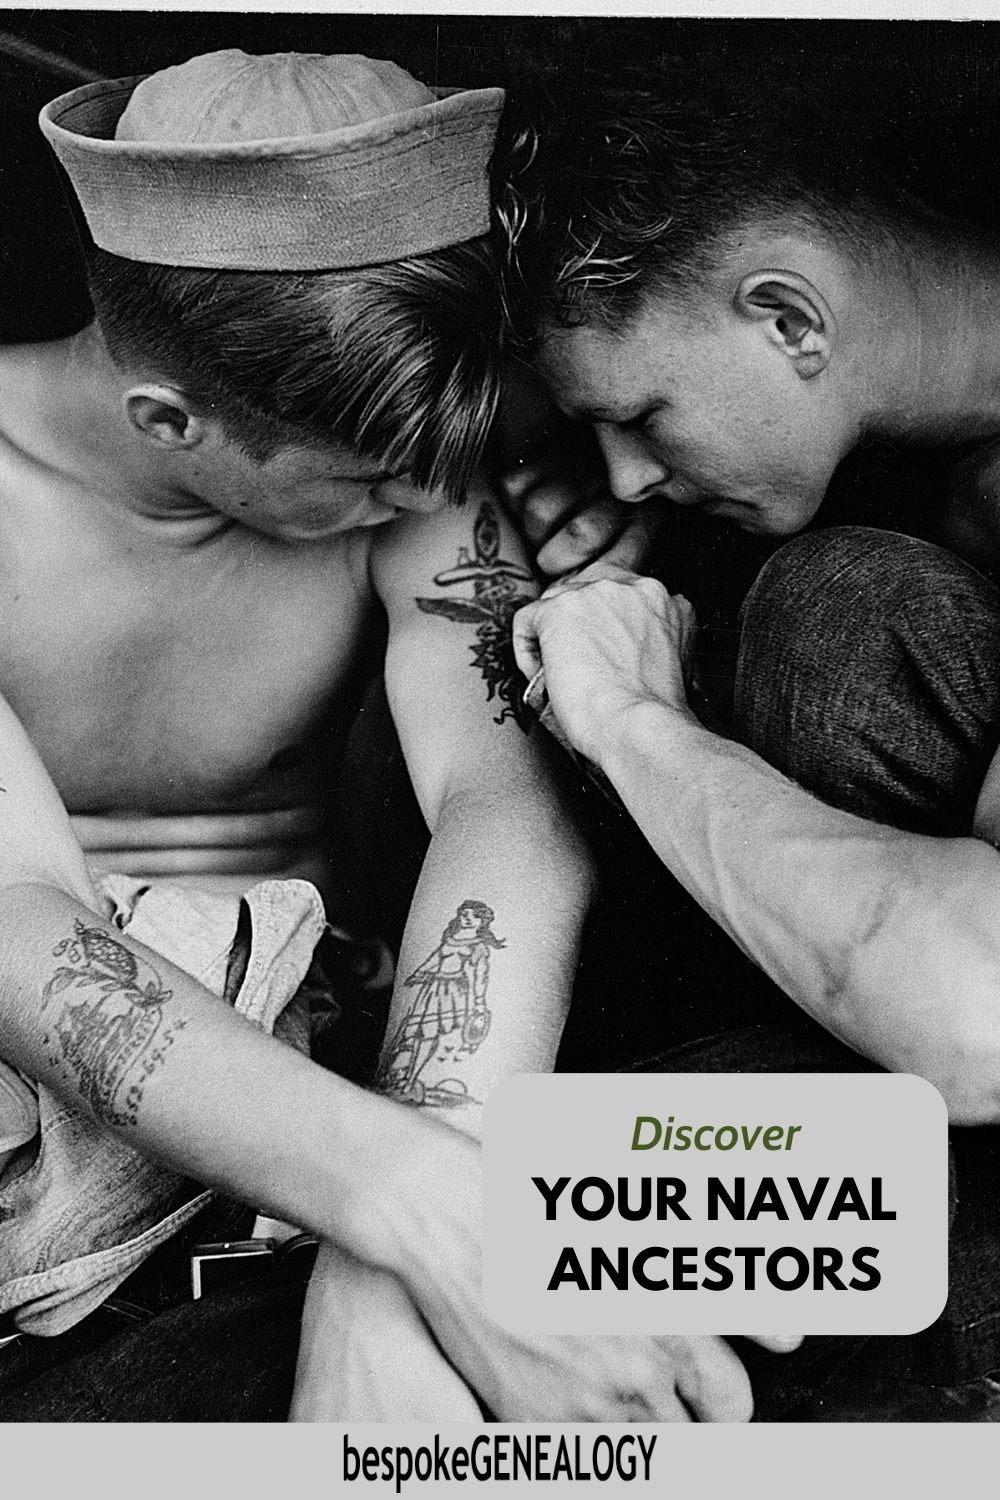 Discover your naval ancestors. Photo from the Second World War of an American sailor getting a tattoo.